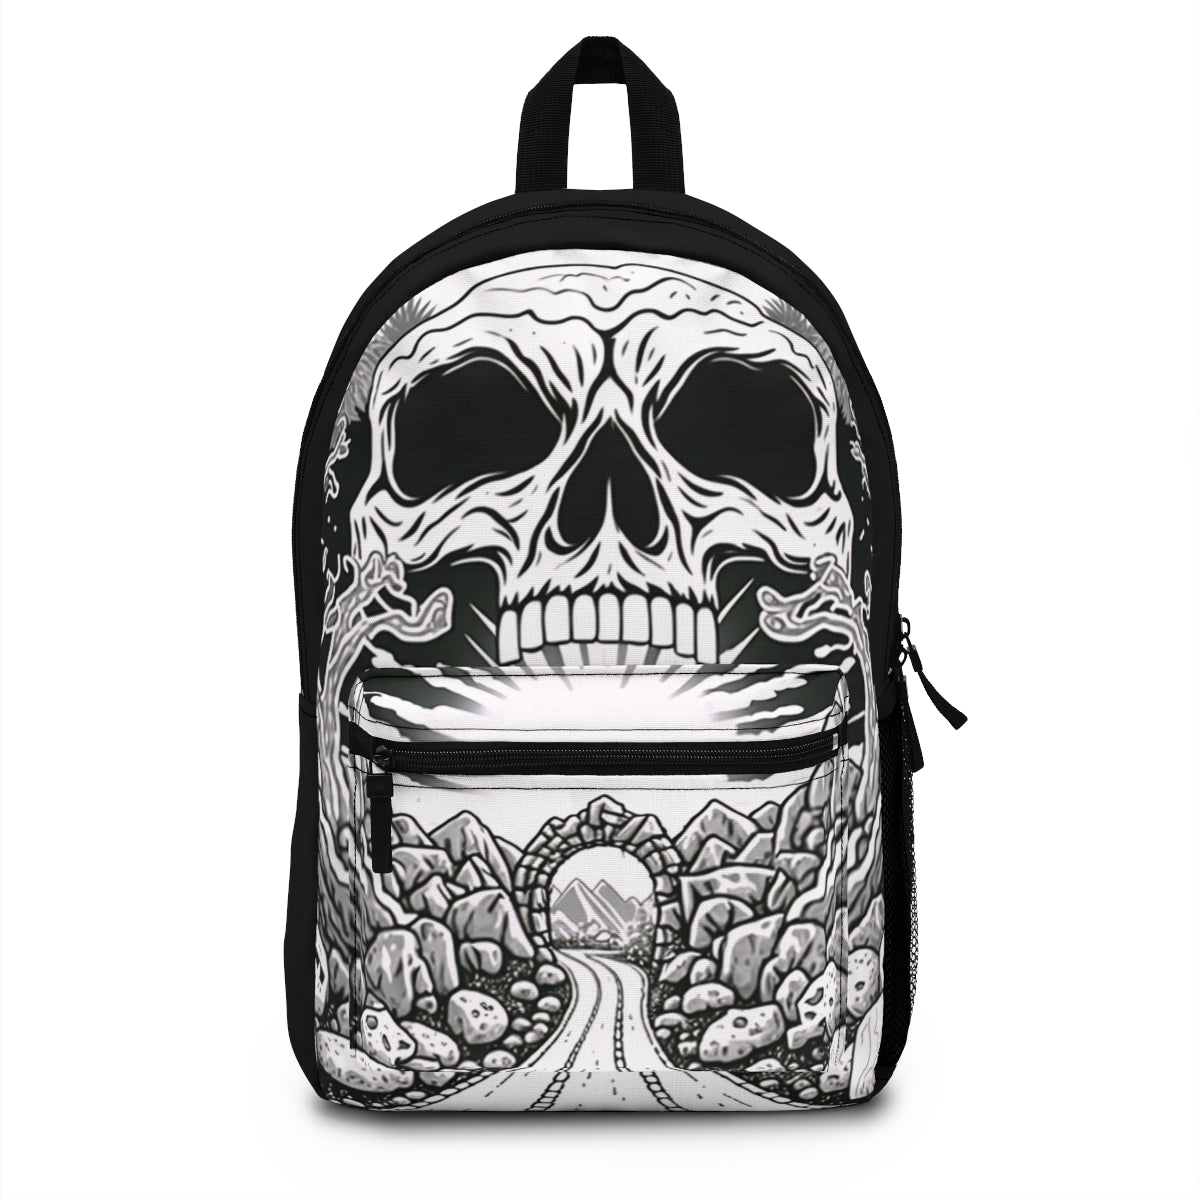 Journey to a skull | Backpack